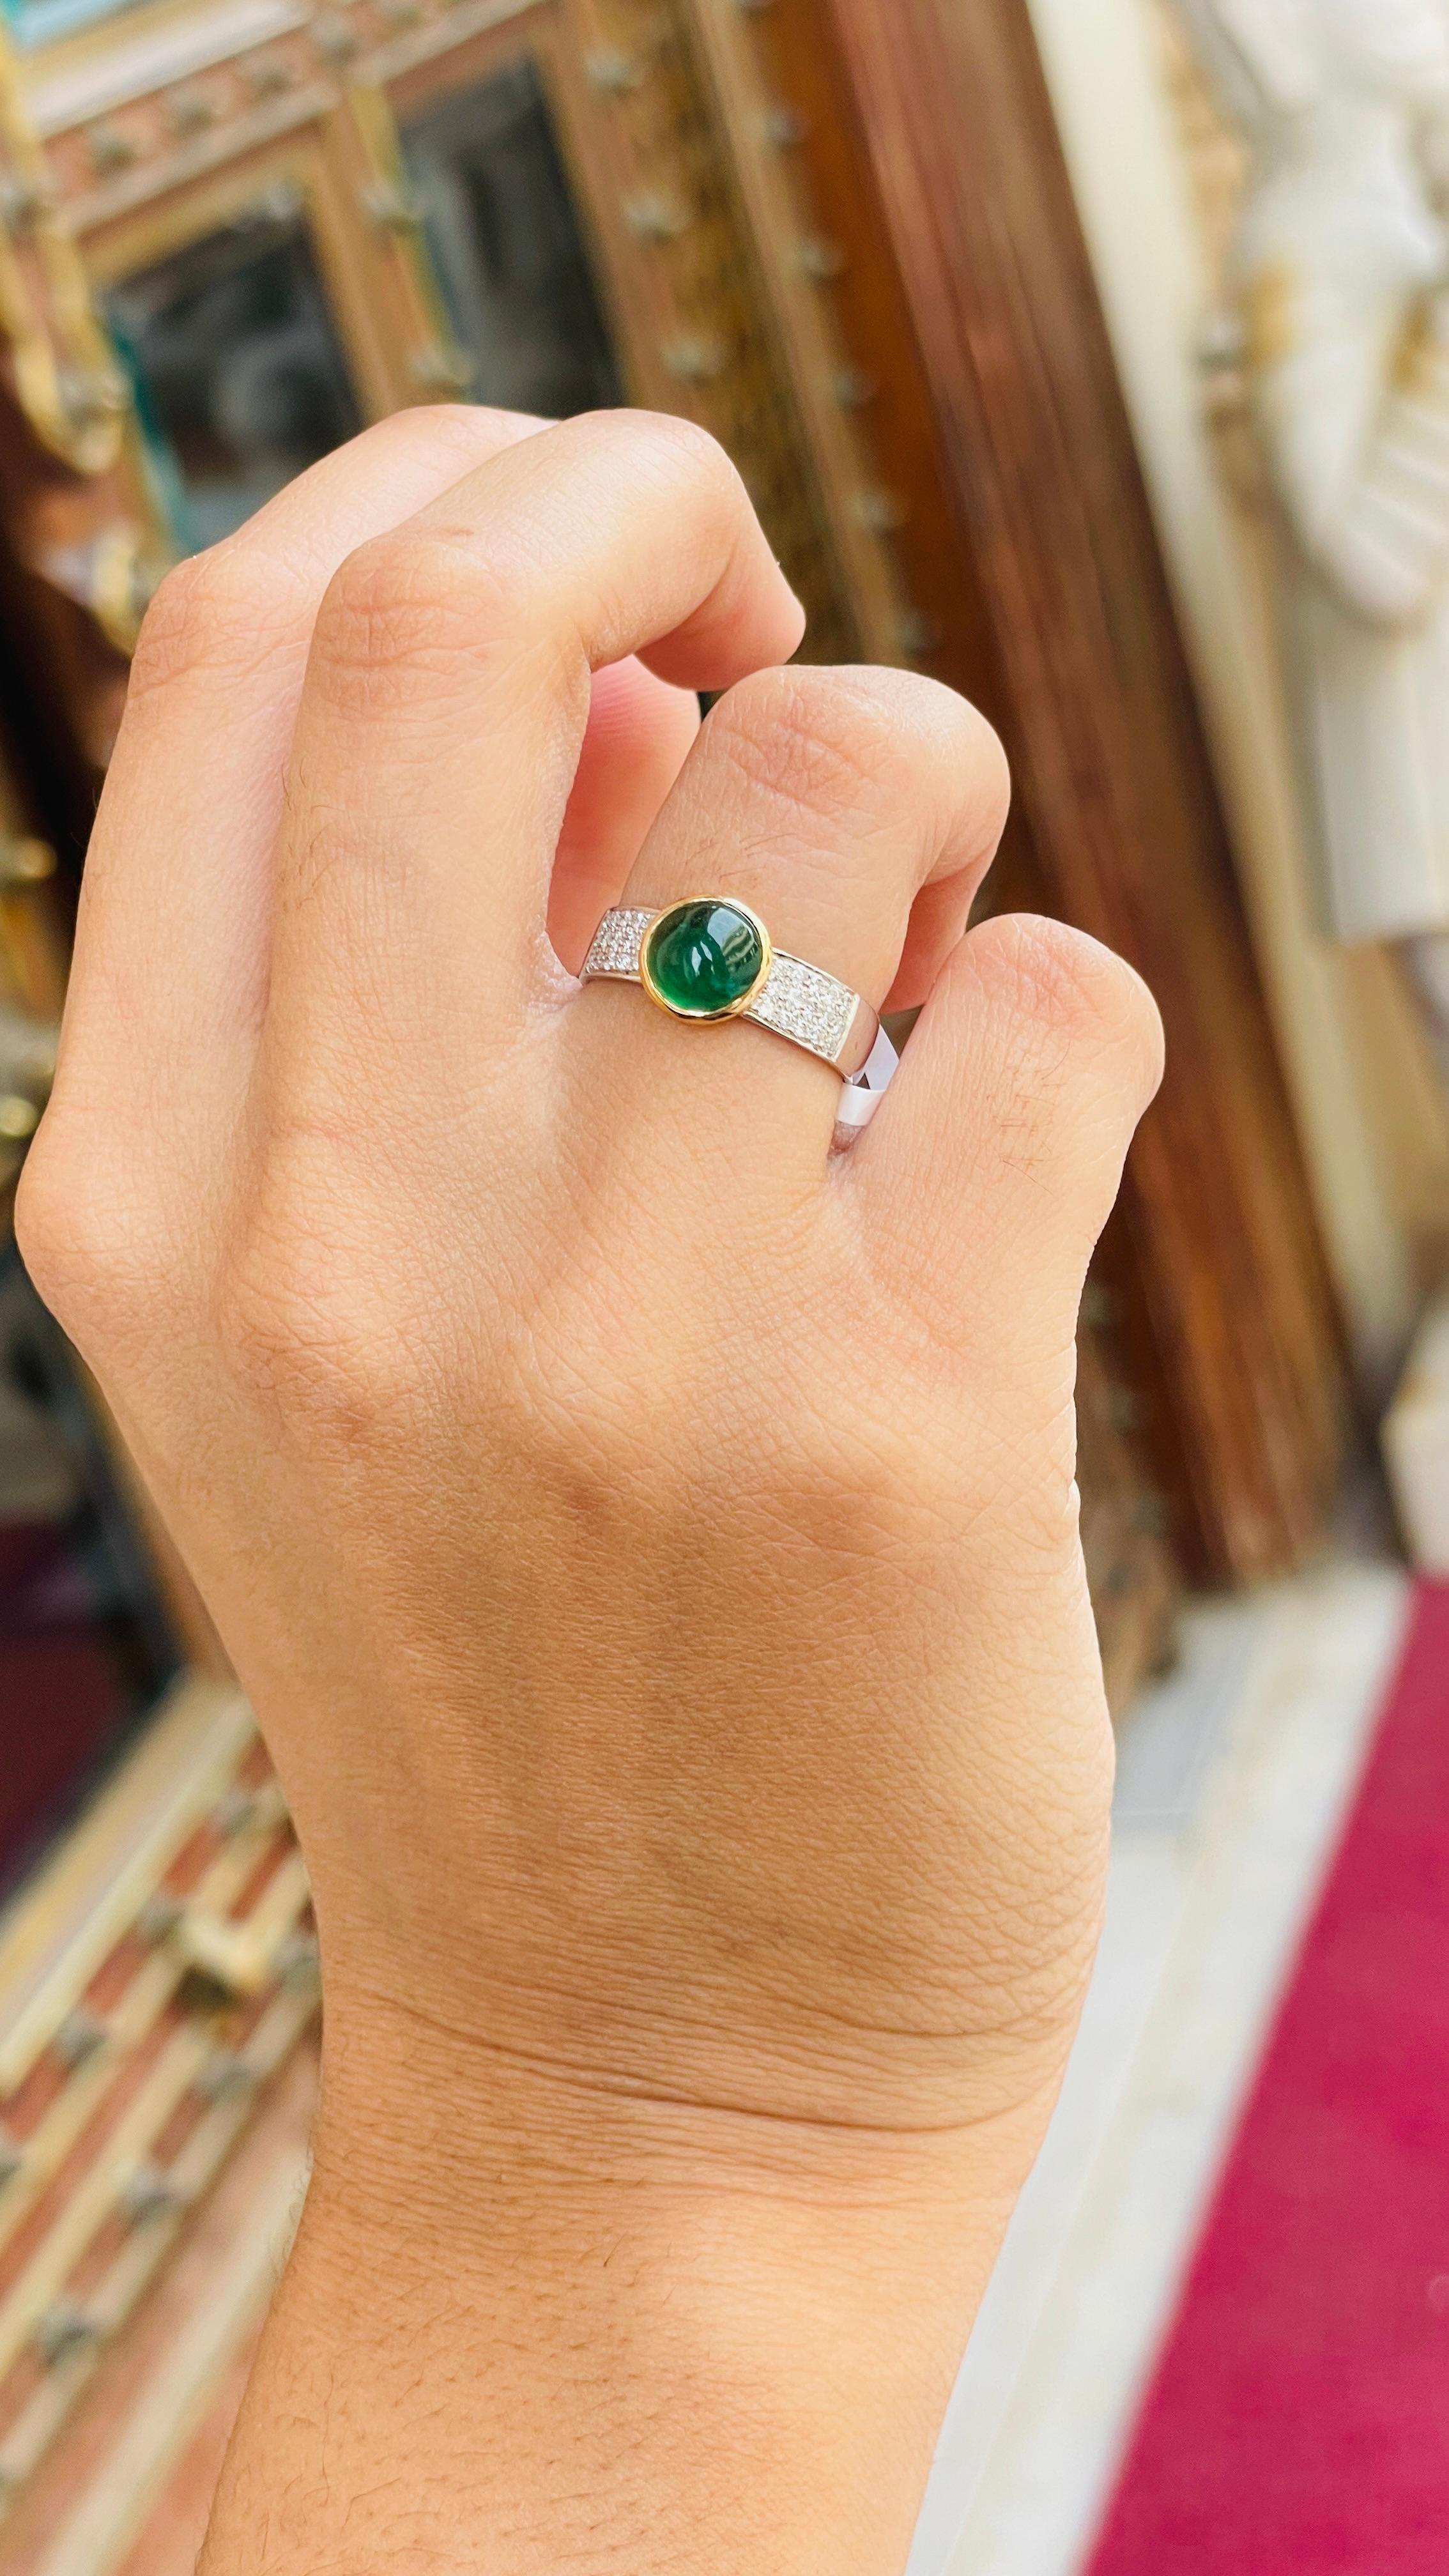 For Sale:  1.72 Carat Emerald and Diamond Ring in 18K White Gold  11